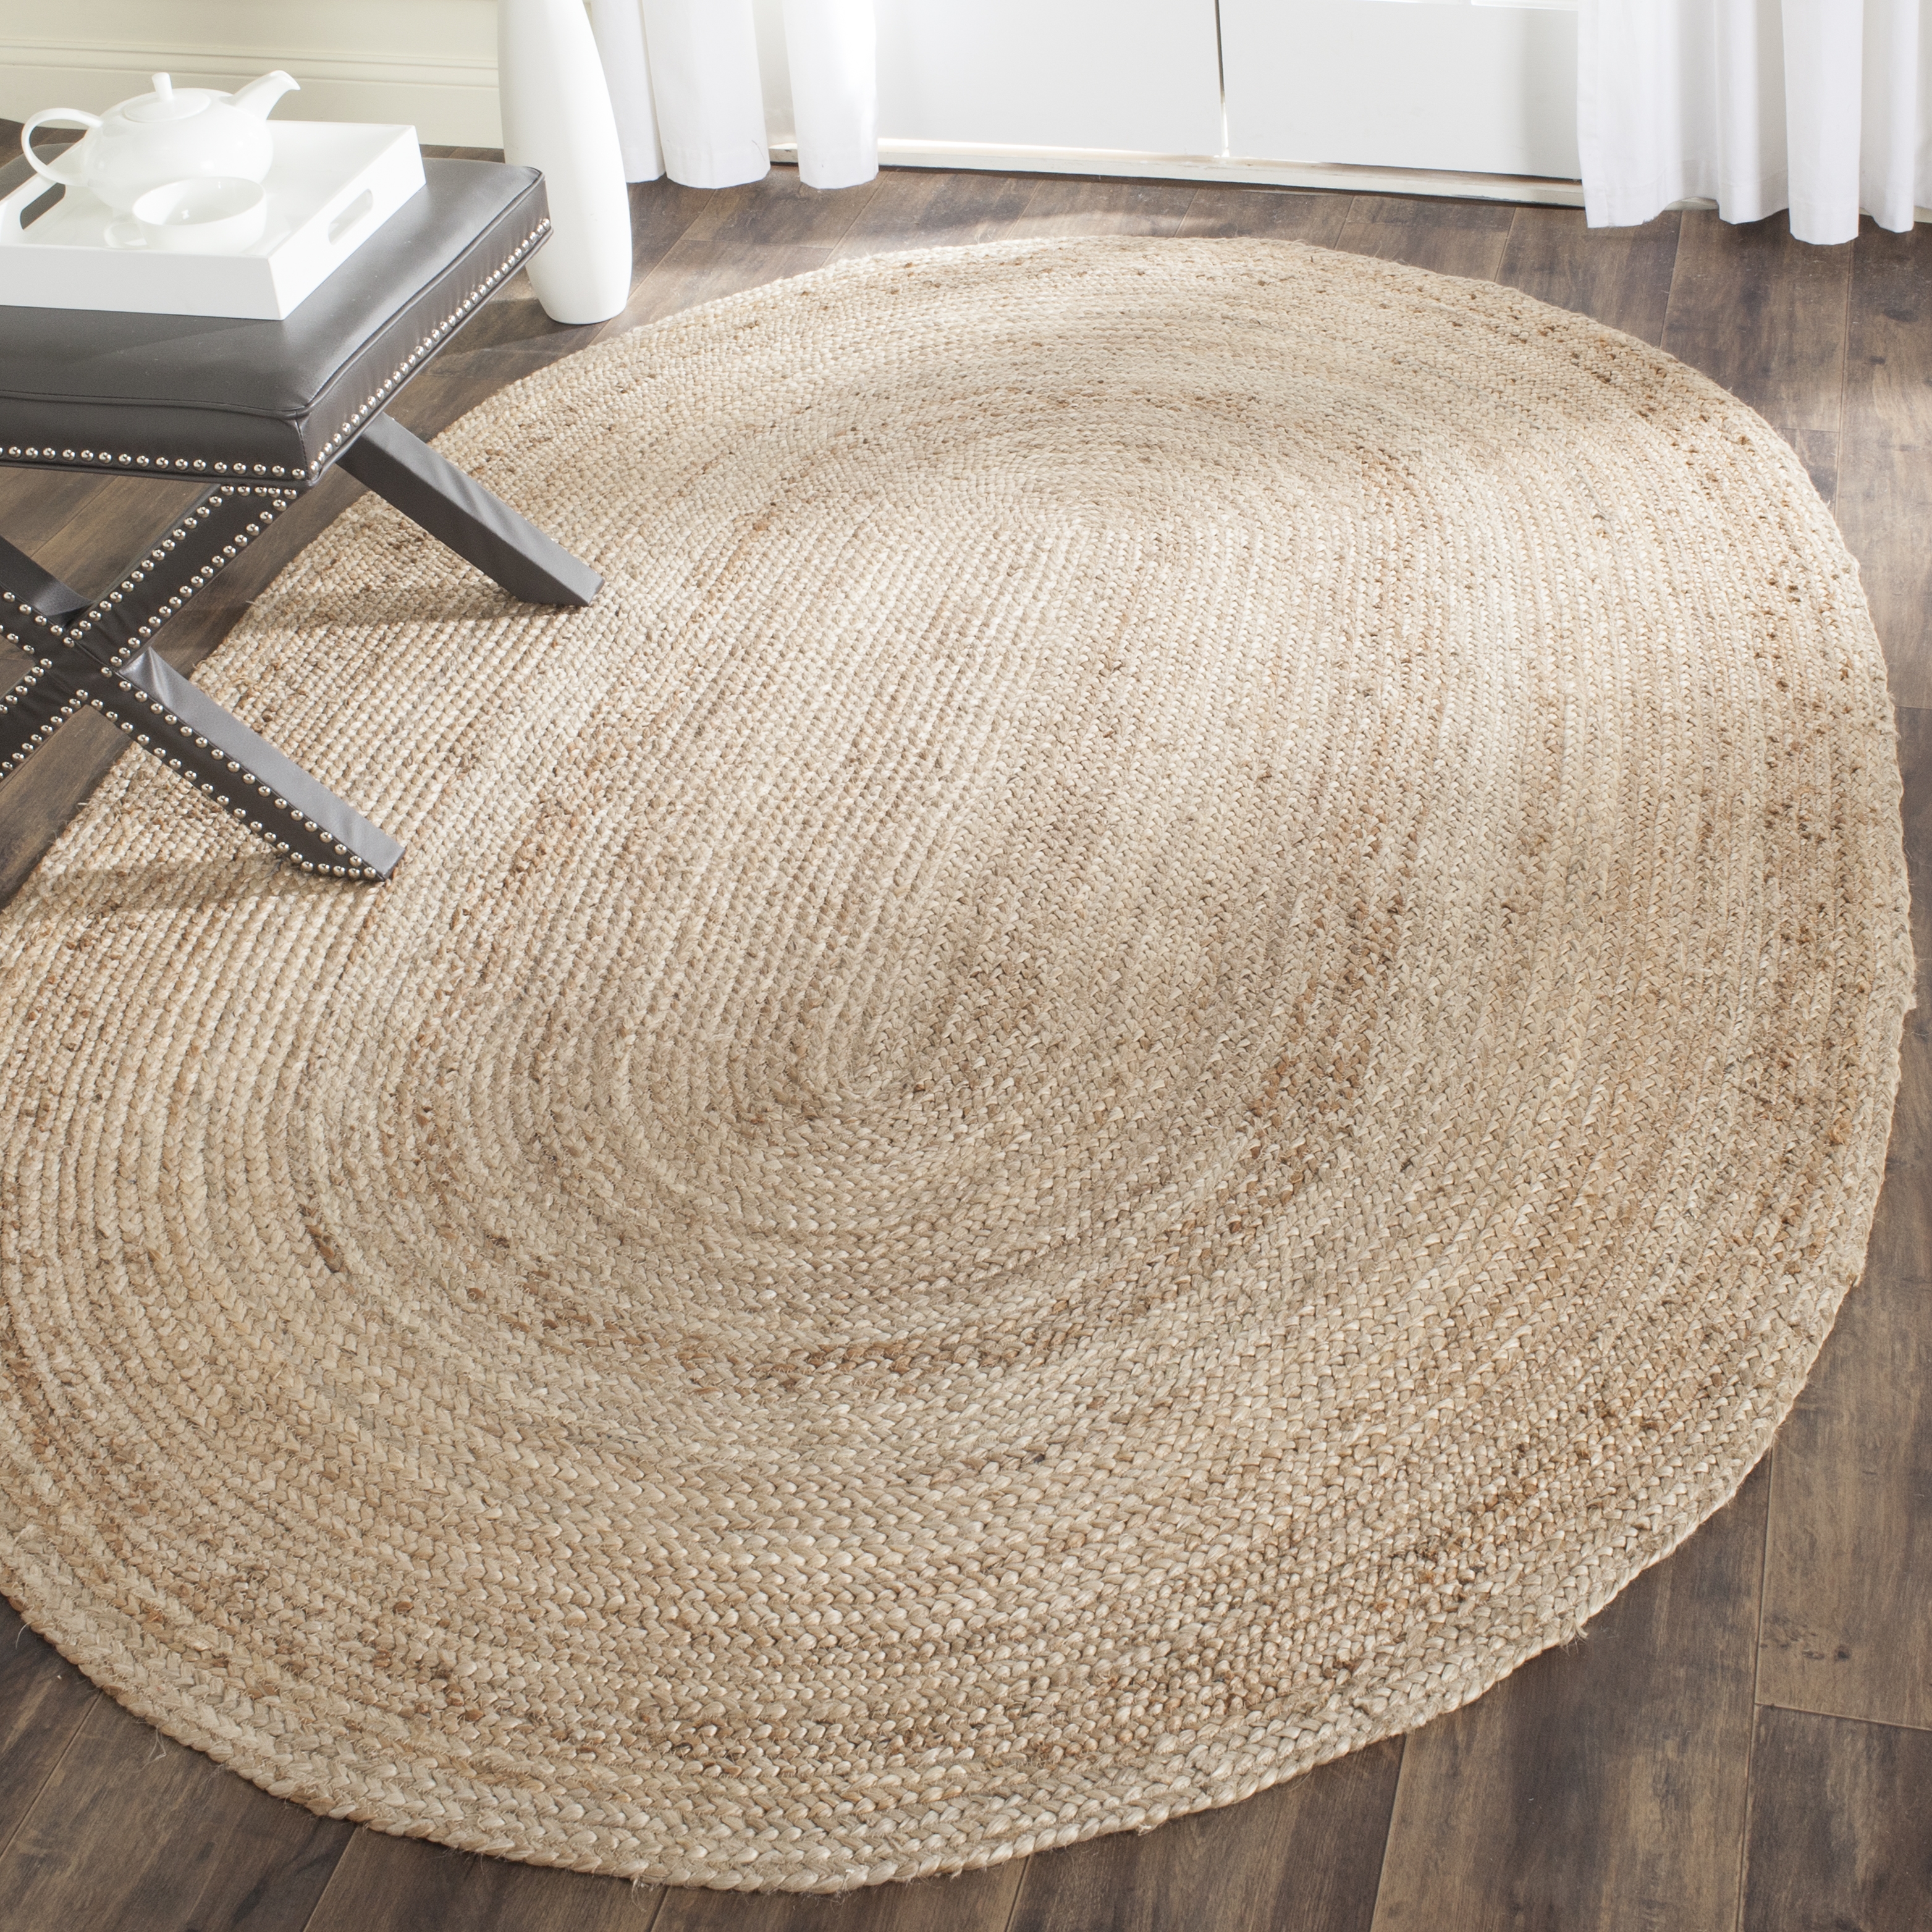 Safavieh Hand Woven Area Rug, CAP252A, Natural,  6' X 9' Oval - Image 1